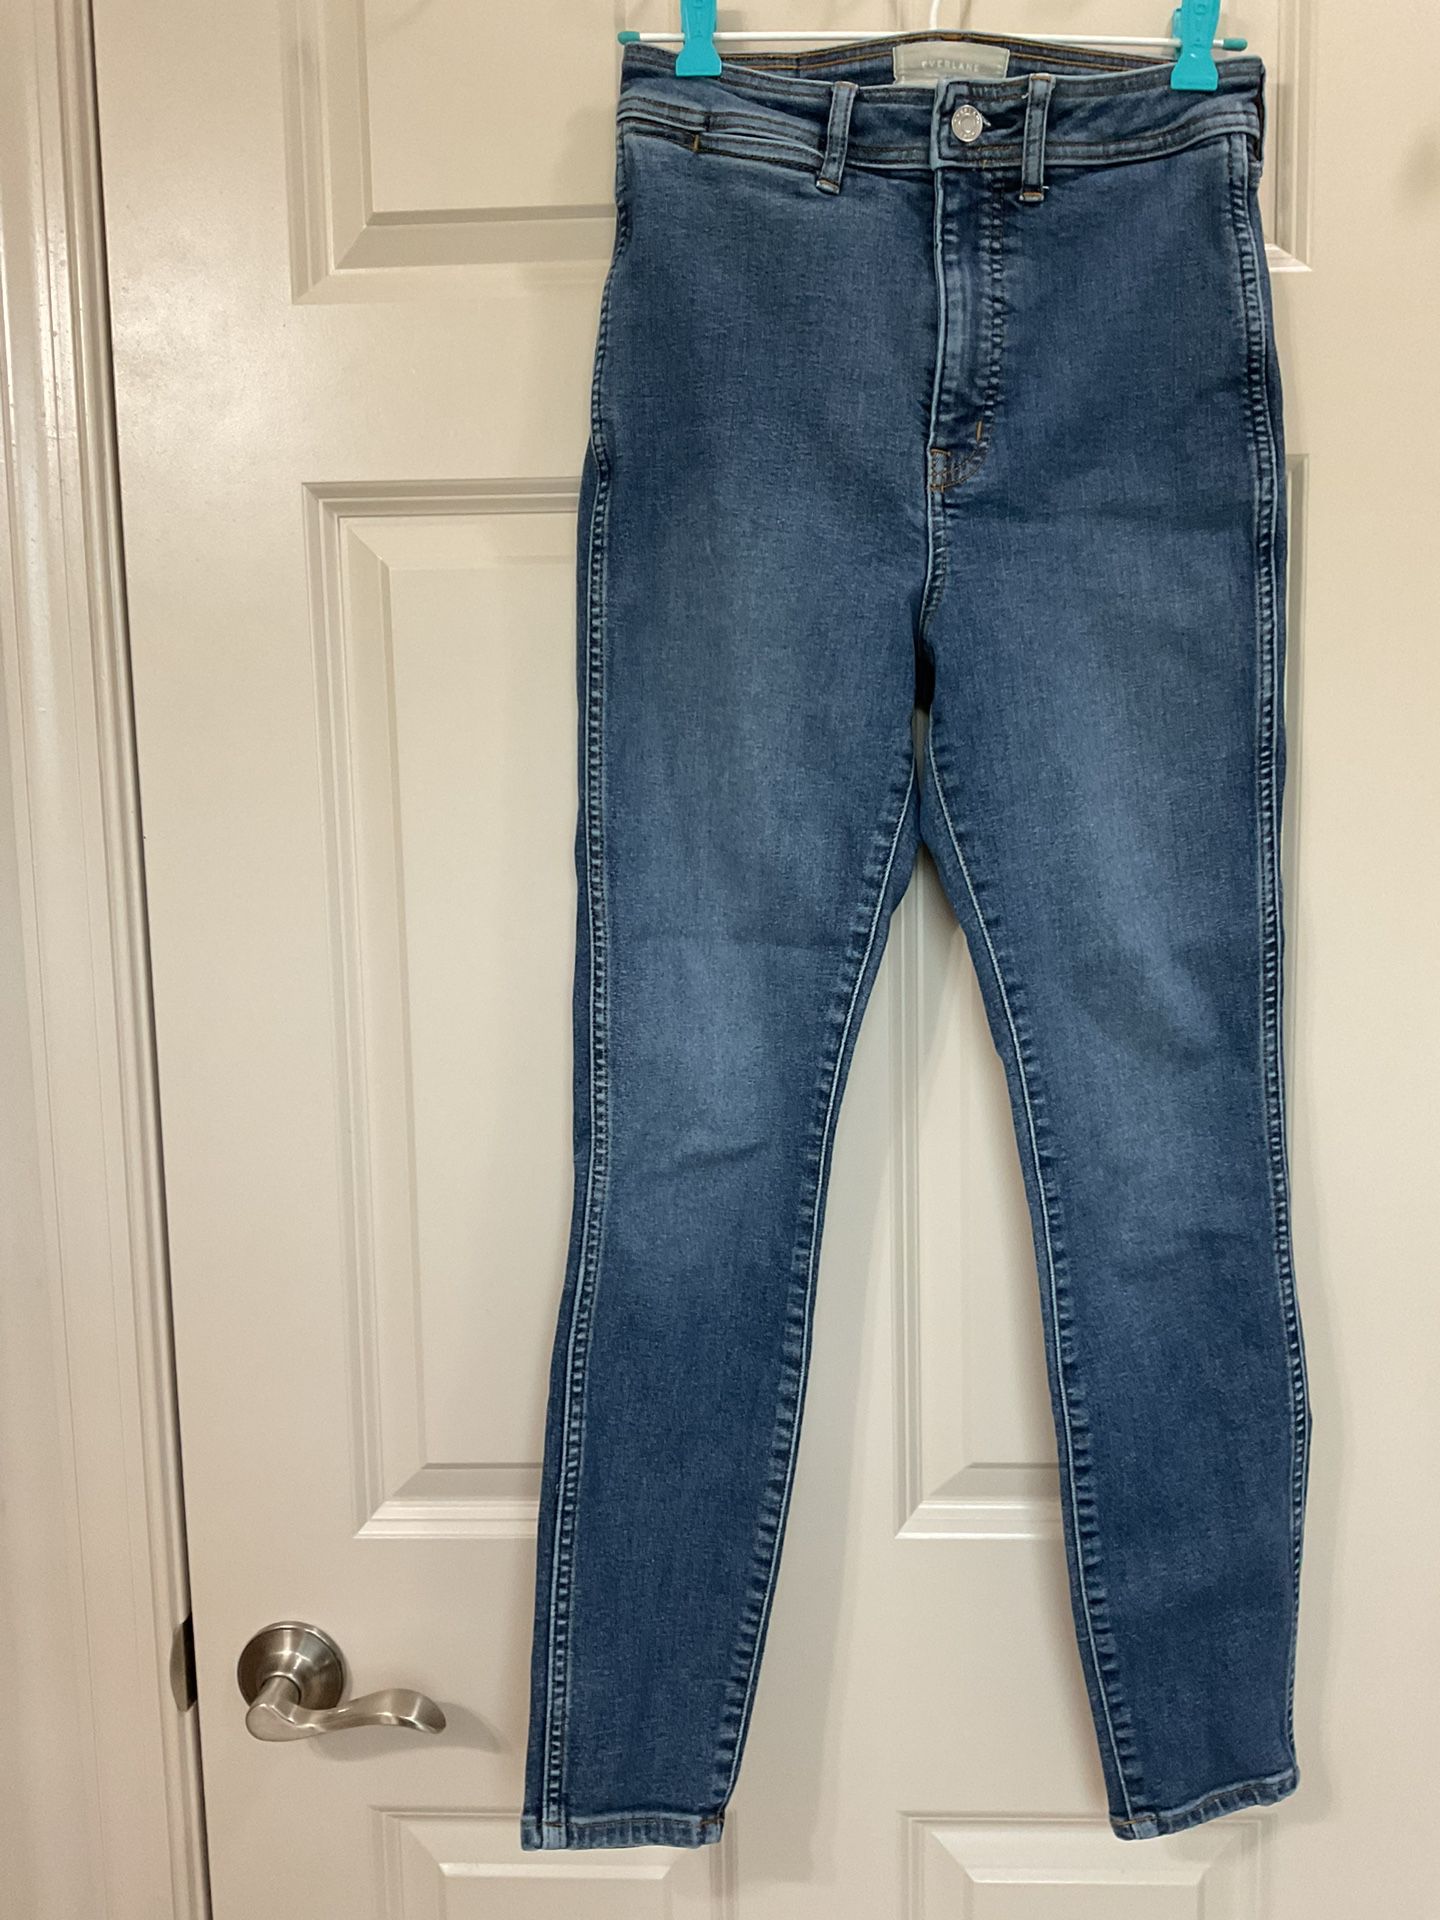 Everlane - The Way High Skinny Jean. Size: 28 Regular. Very good condition. 